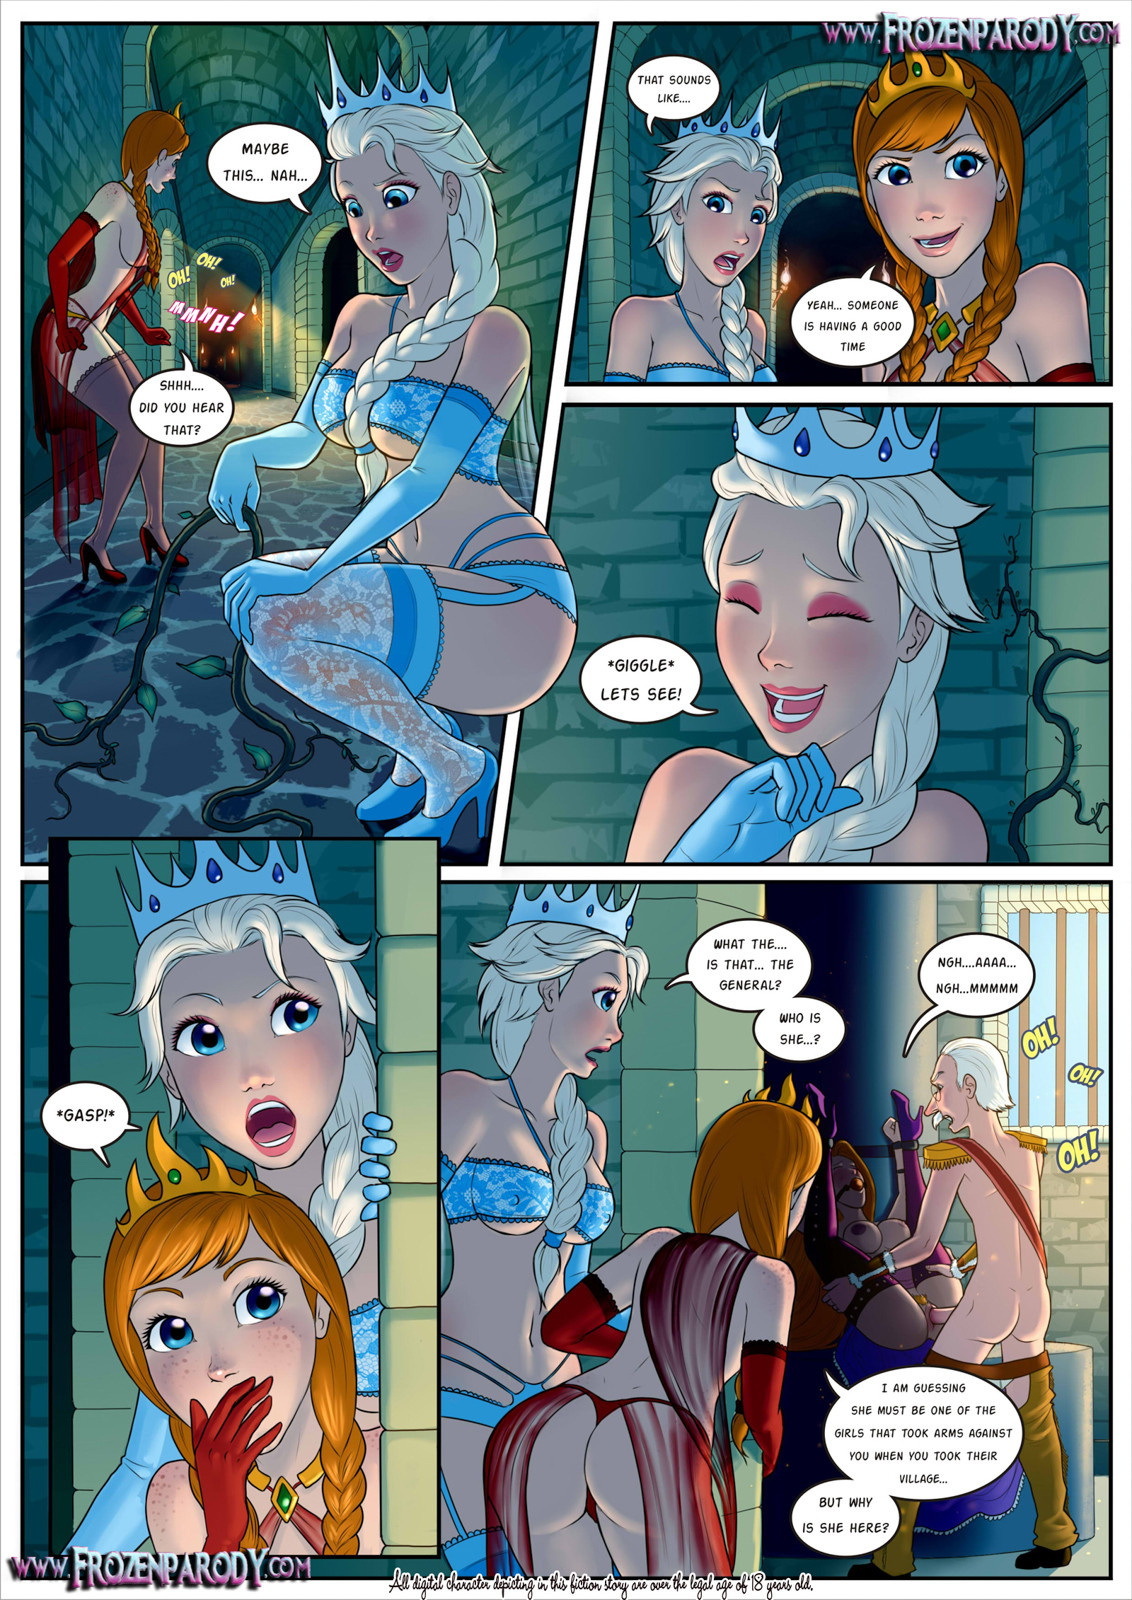 Frozen Parody 5 - Page 2